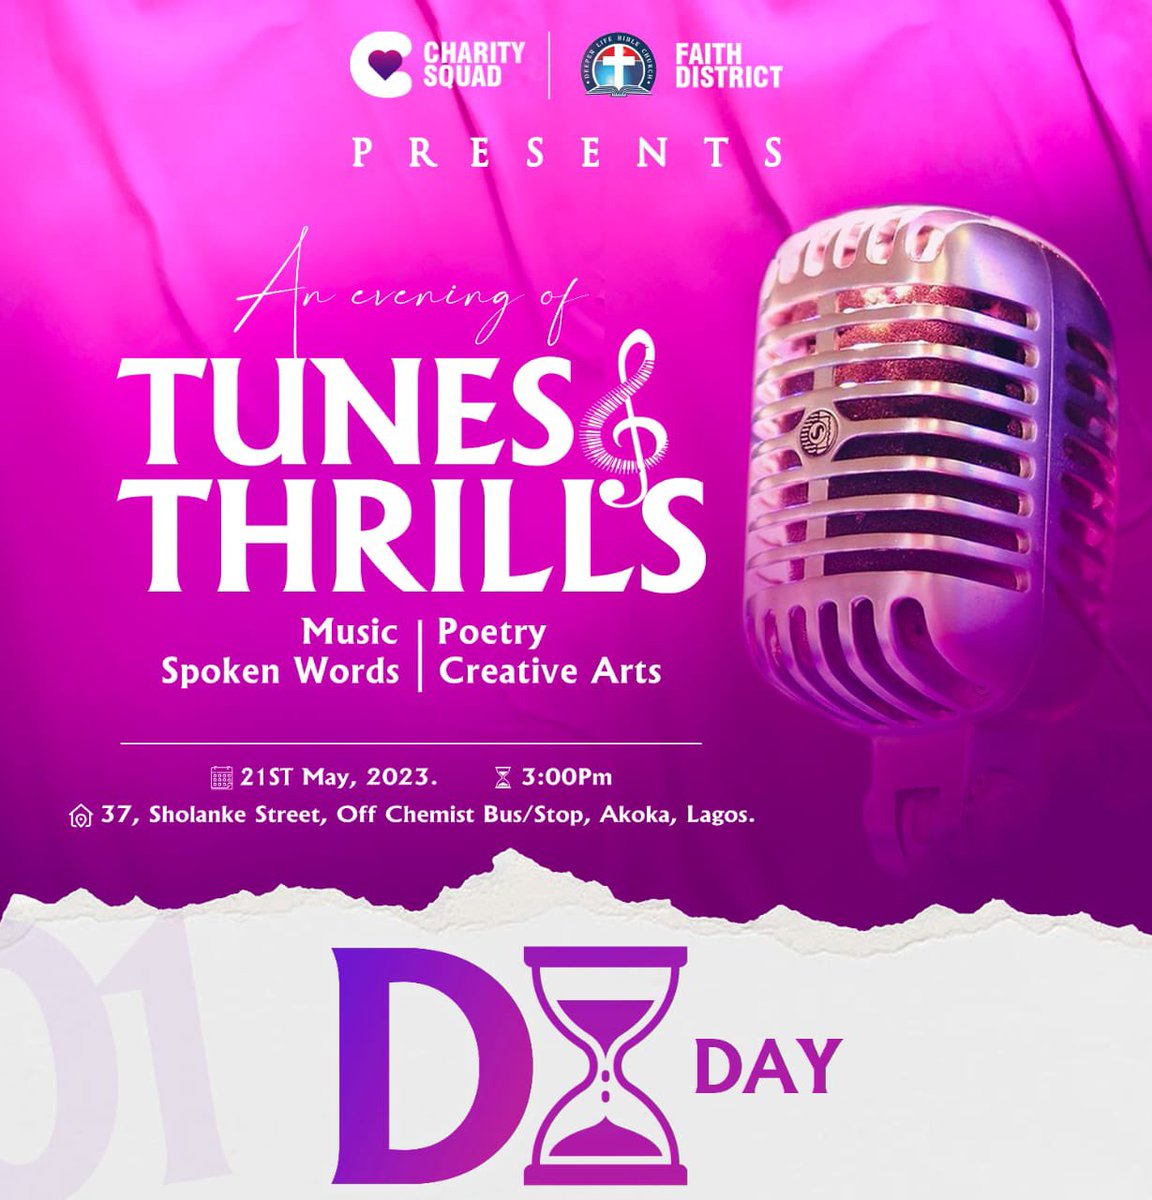 It’s Tunes and Thrills o’clock🥁🥁
It’s the Day the Lord has made.
We’d be glad and rejoice together at 37, Sholanke street, Akoka by 3pm TODAY.

#TAT23 #Charitysquad #Faithtrybers #youngadult